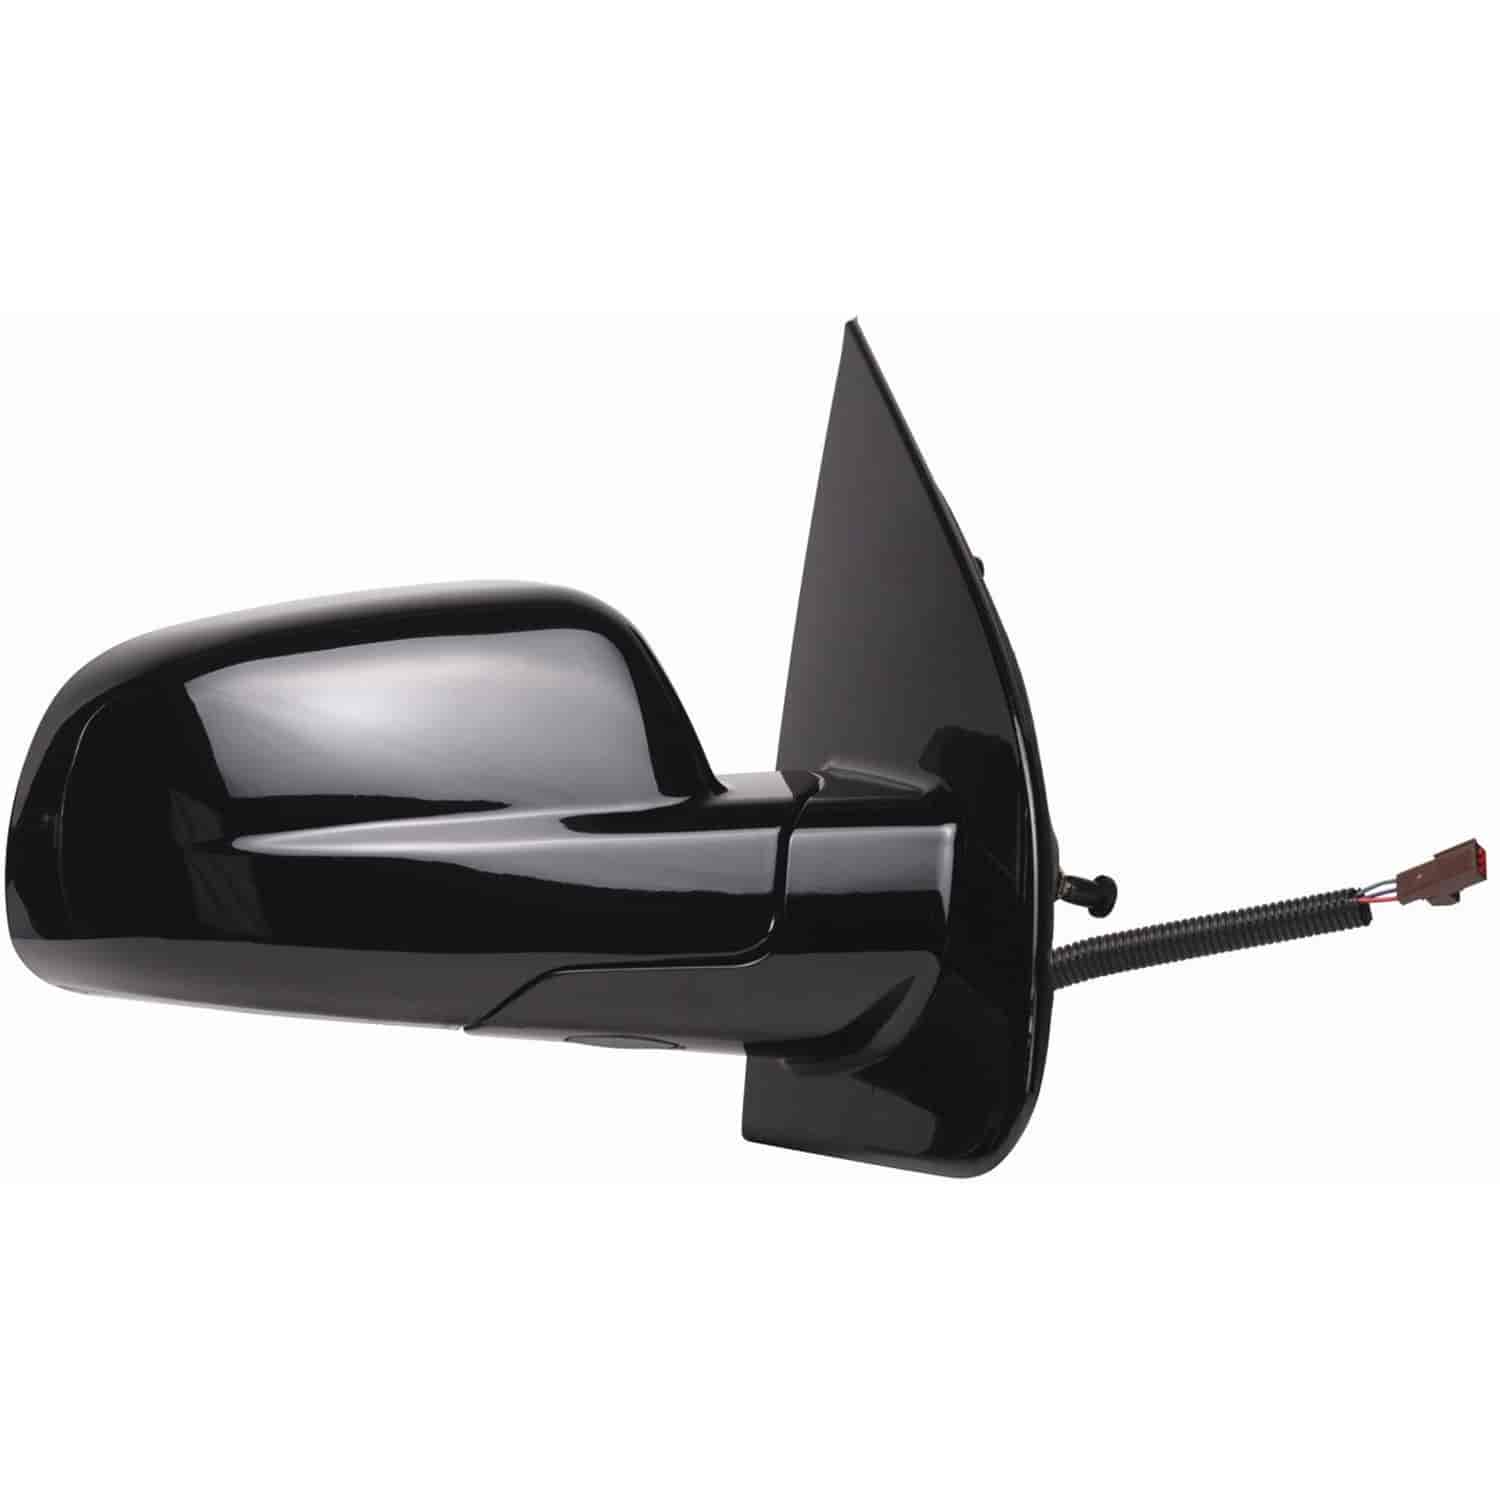 OEM Style Replacement mirror for 04-05 Ford Freestar